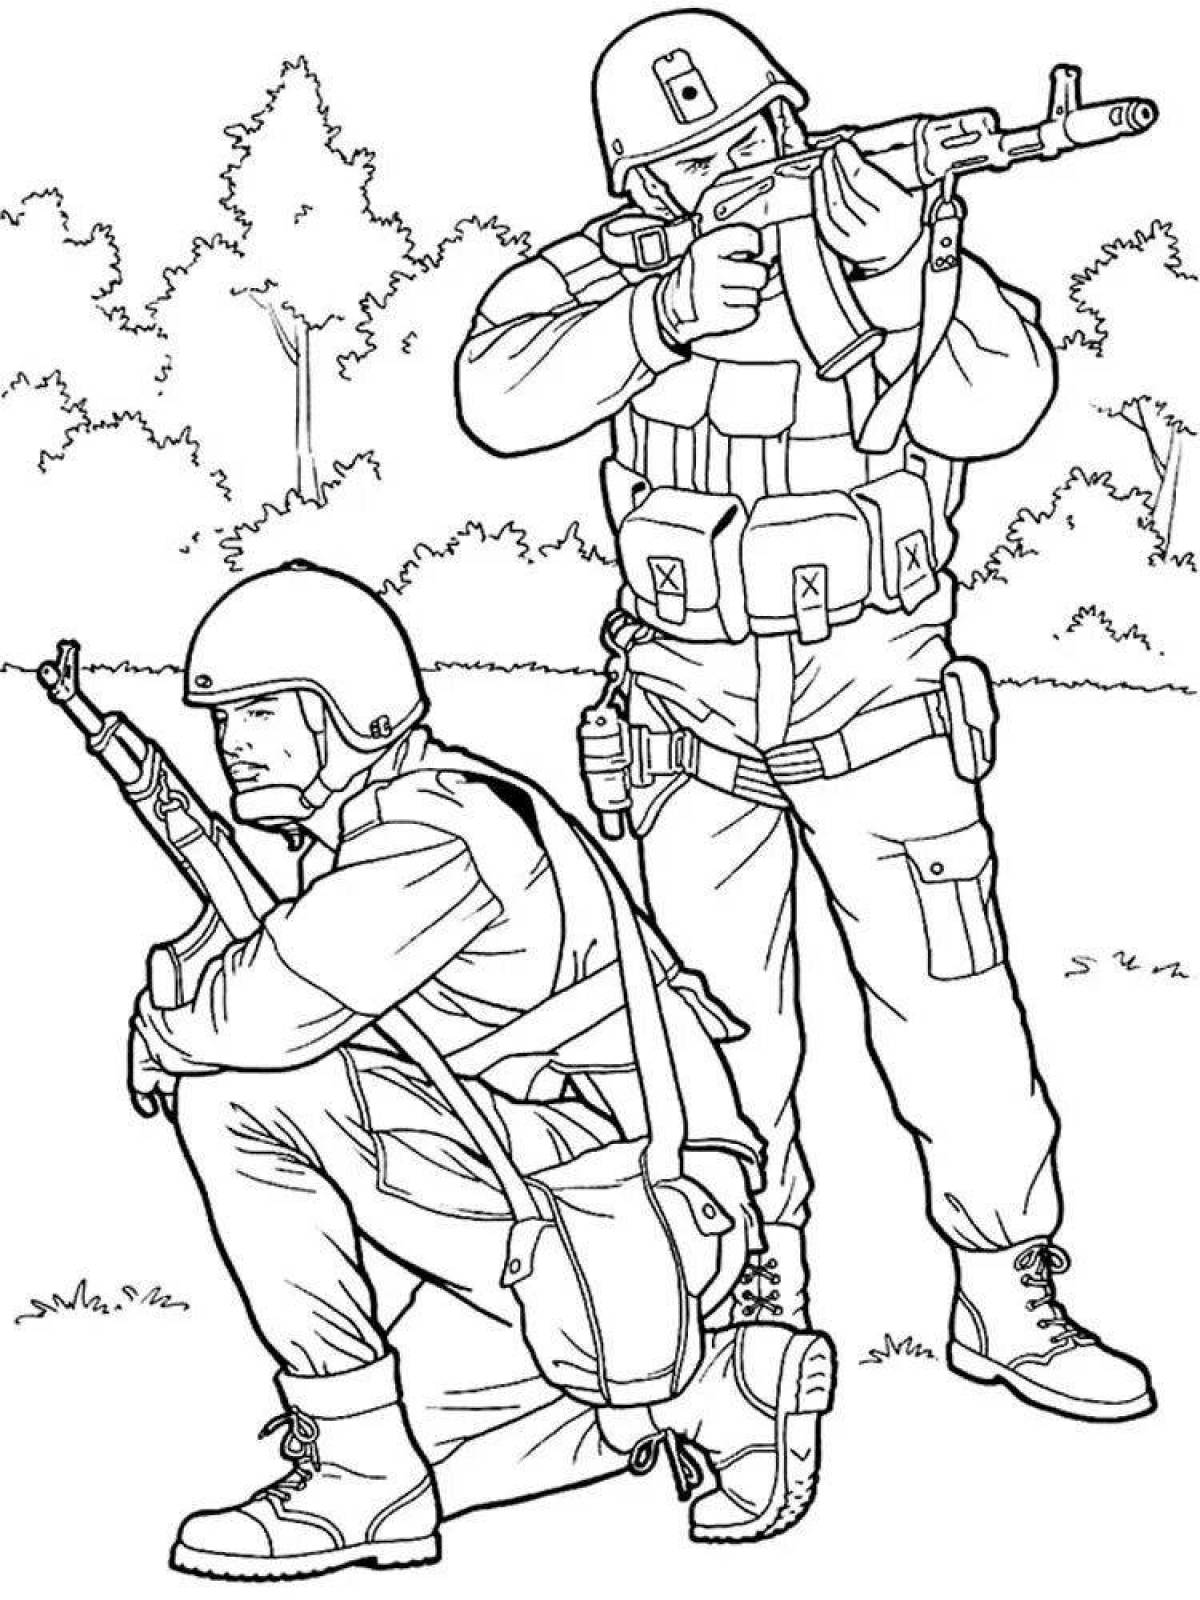 Coloring page elegant russian army